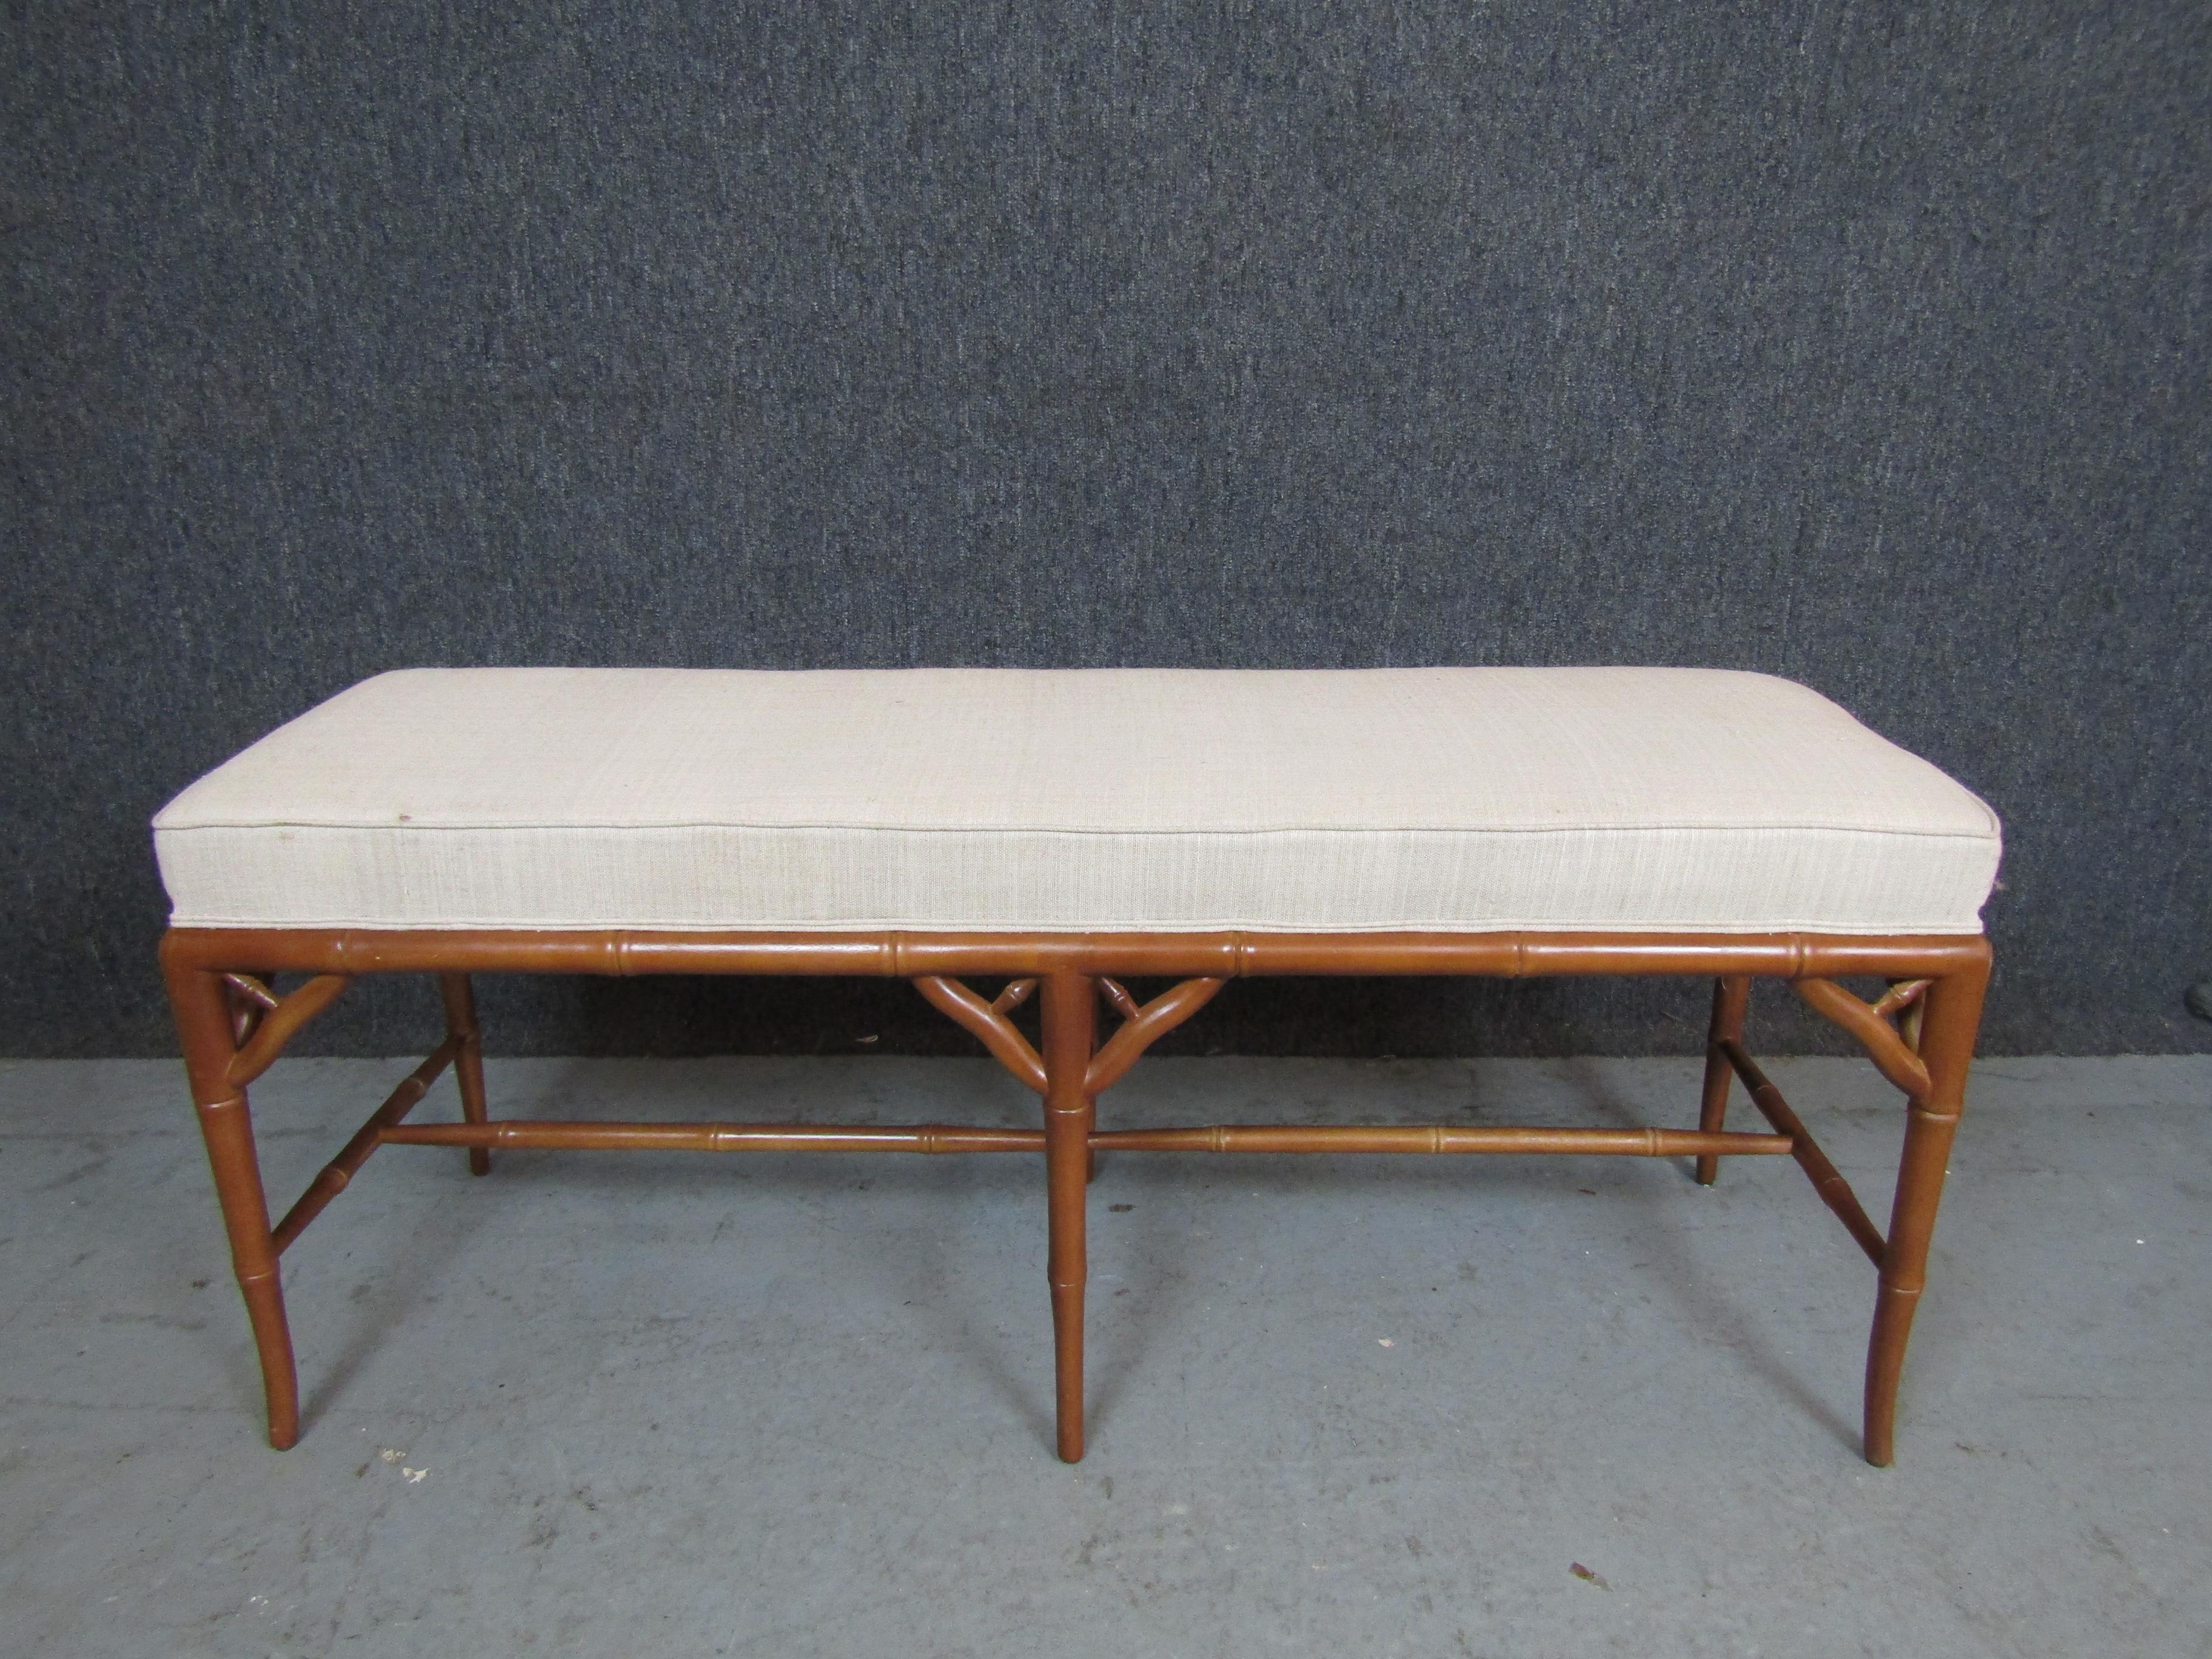 Four foot wide bench on bamboo style frame. Simple and attractive entry seating.
Please confirm location NY or NJ